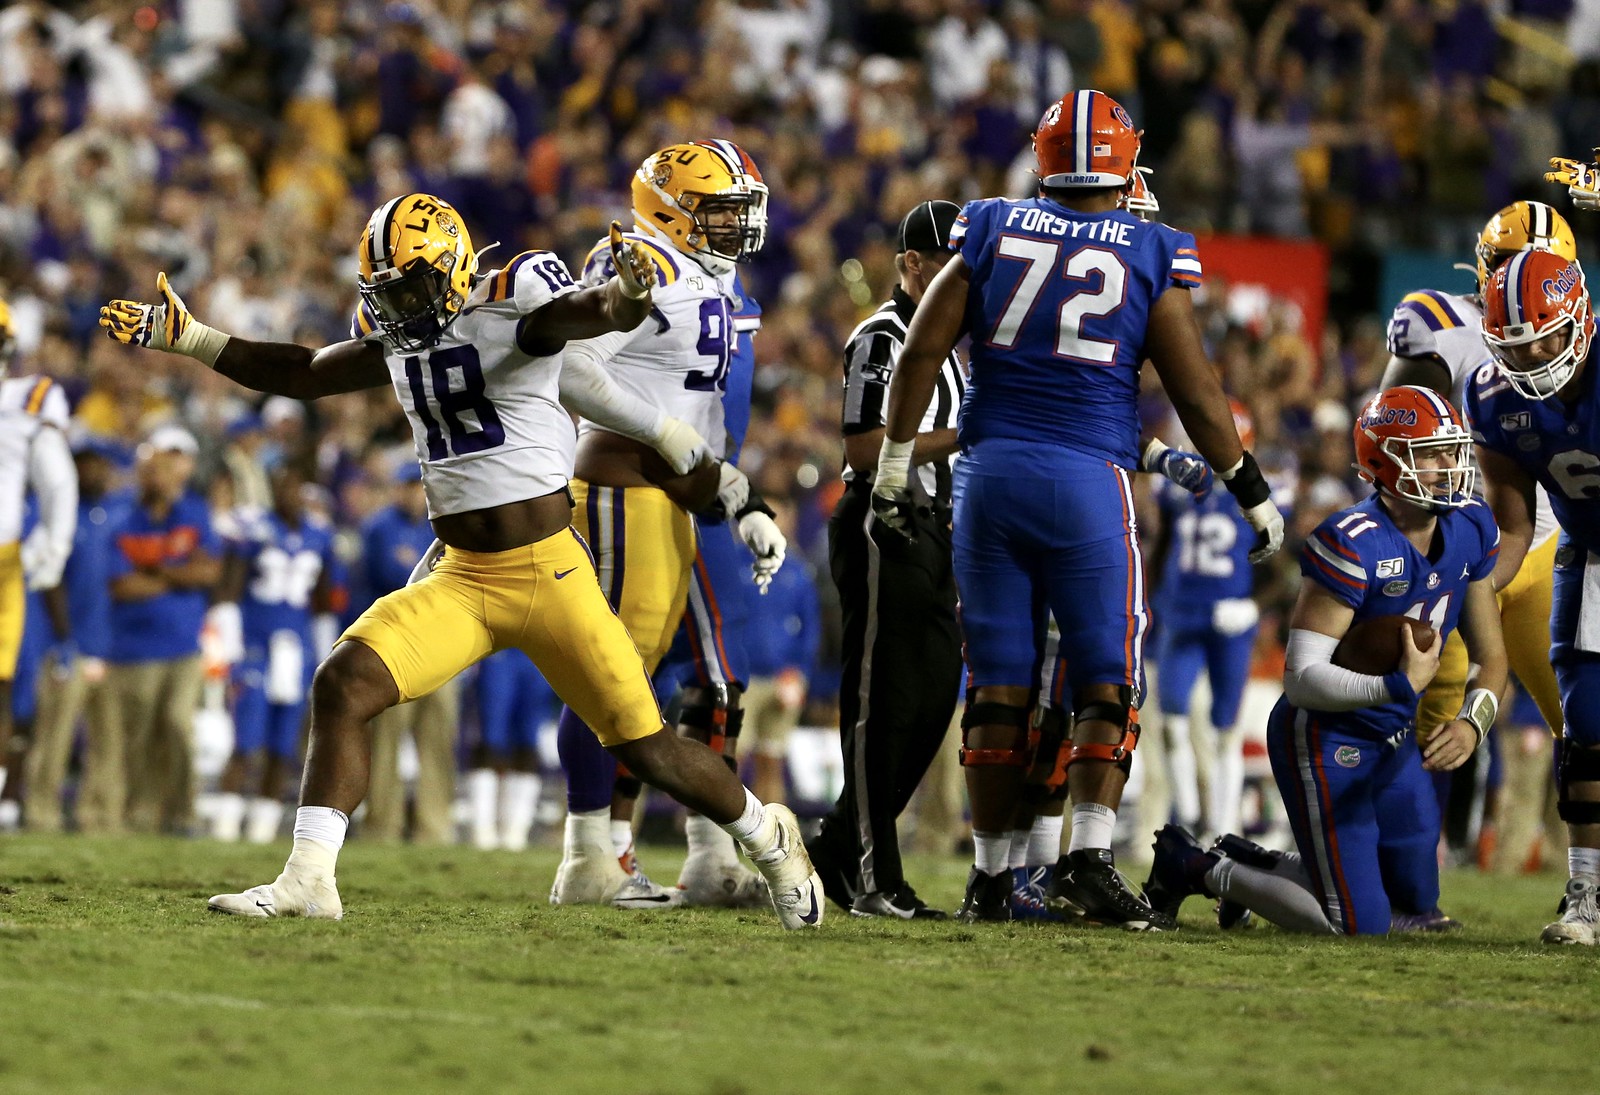 UF at LSU by Jonathan Mailhes (4)